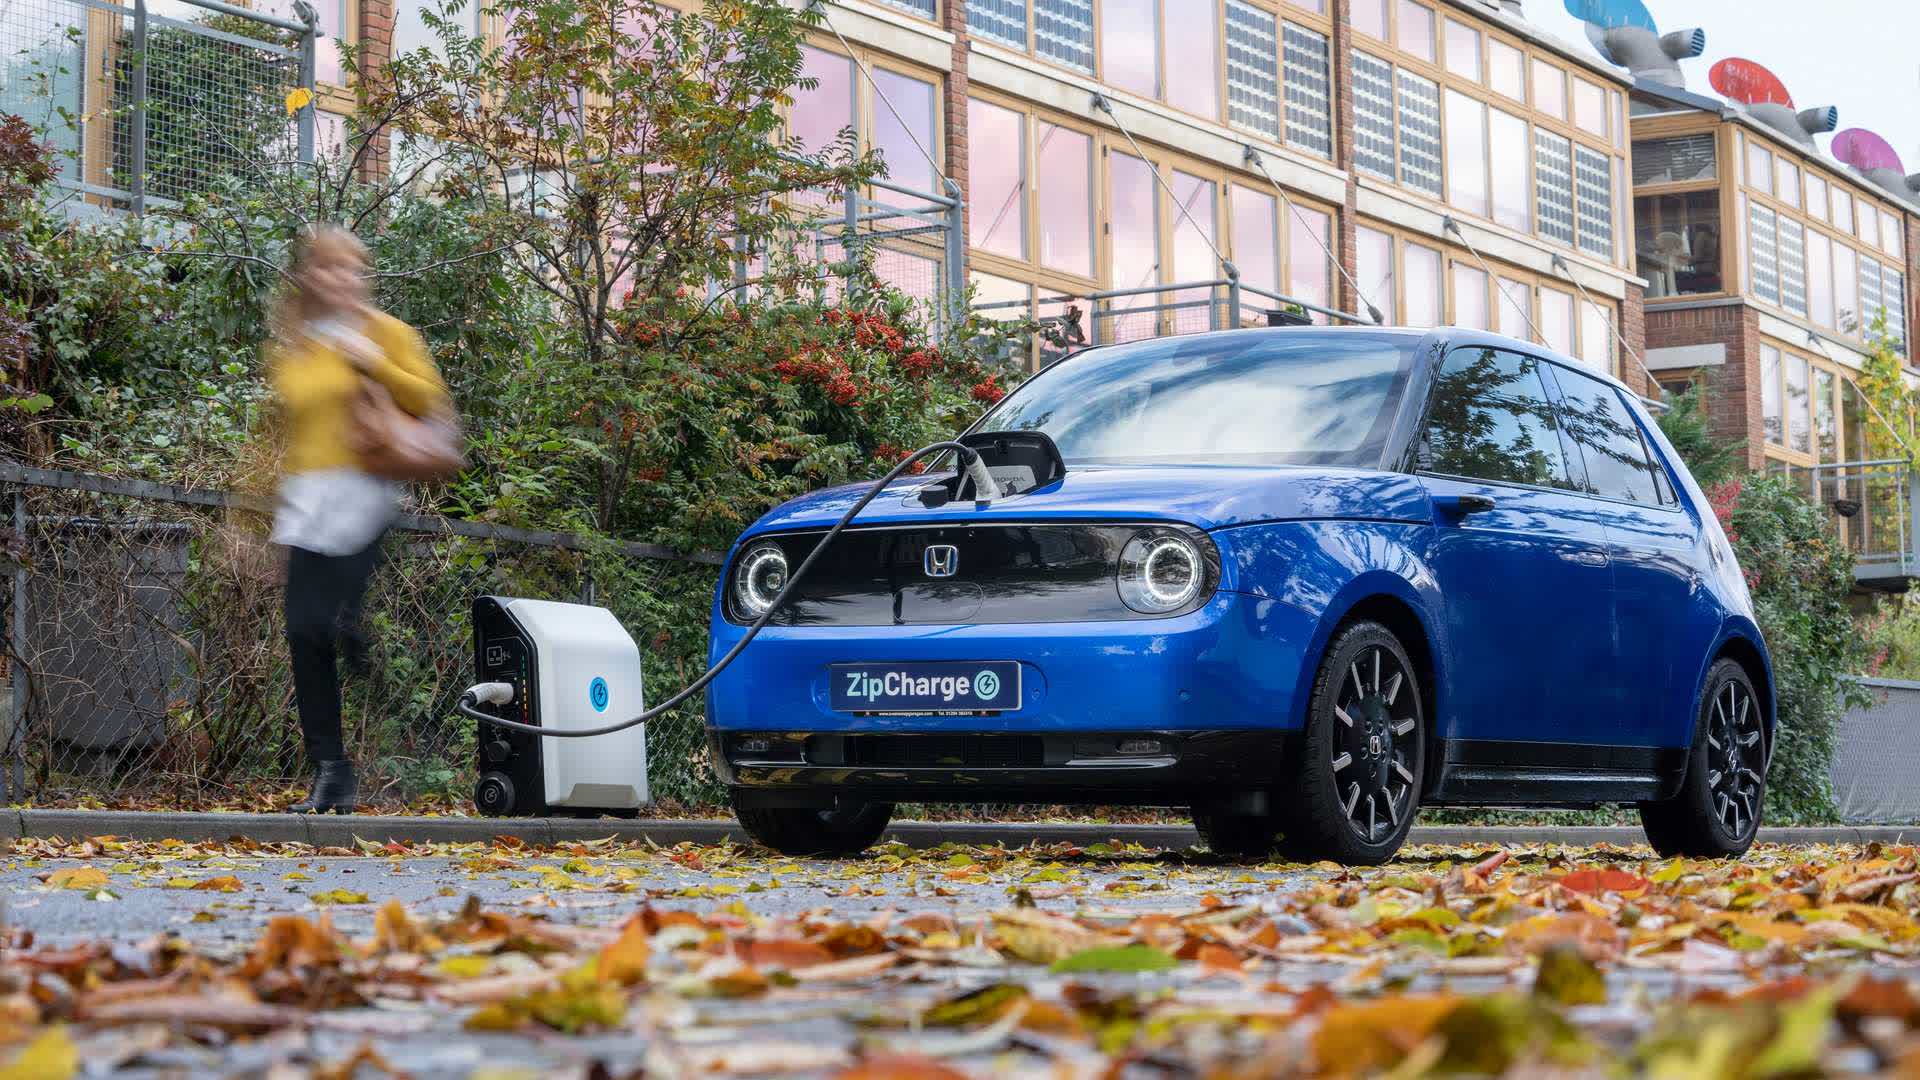 ZipCharge Go is a portable powerbank for your electric vehicle